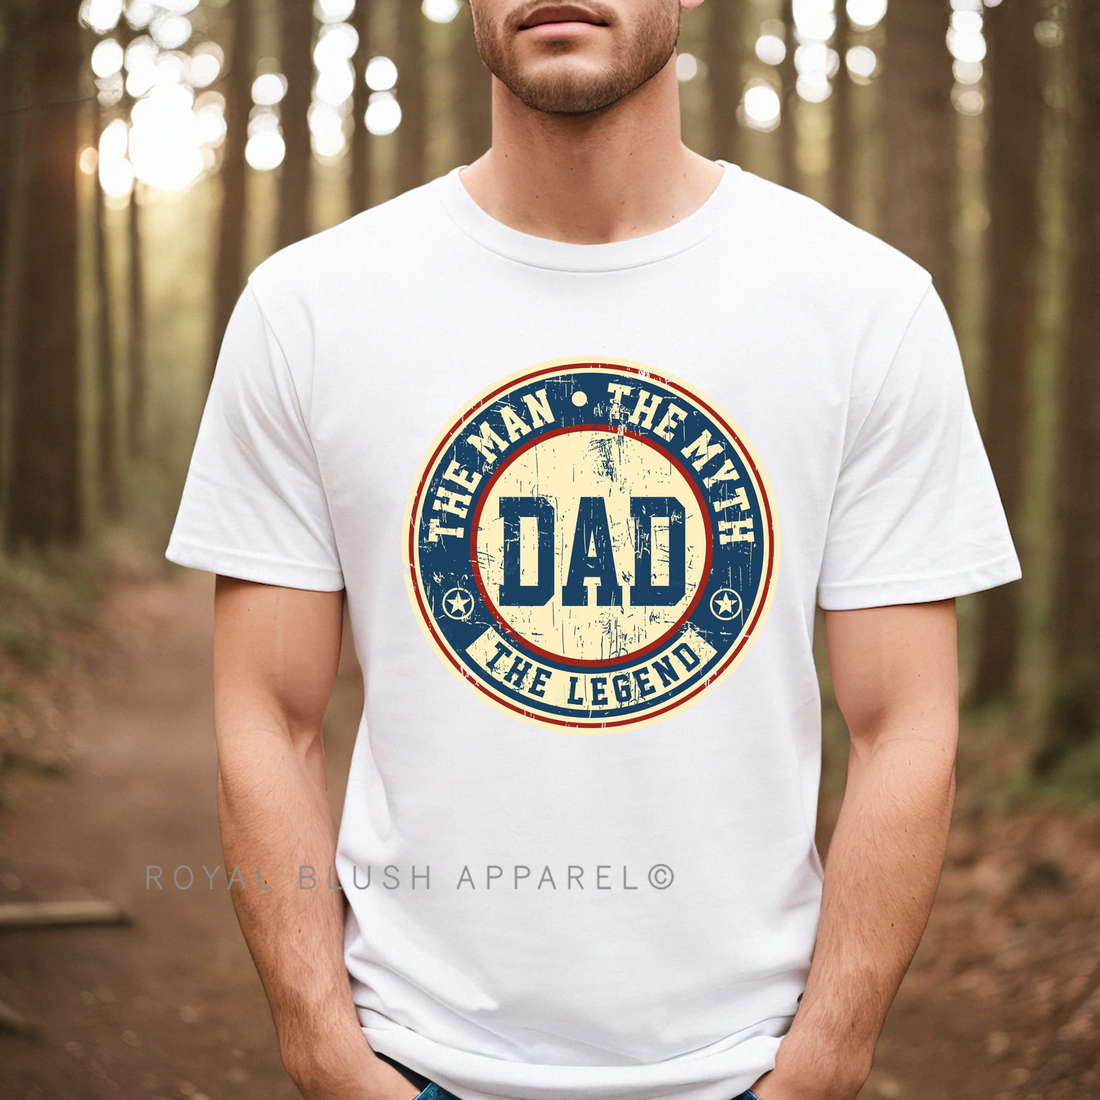 The Man. The Myth. The Legend Relaxed Unisex T-shirt